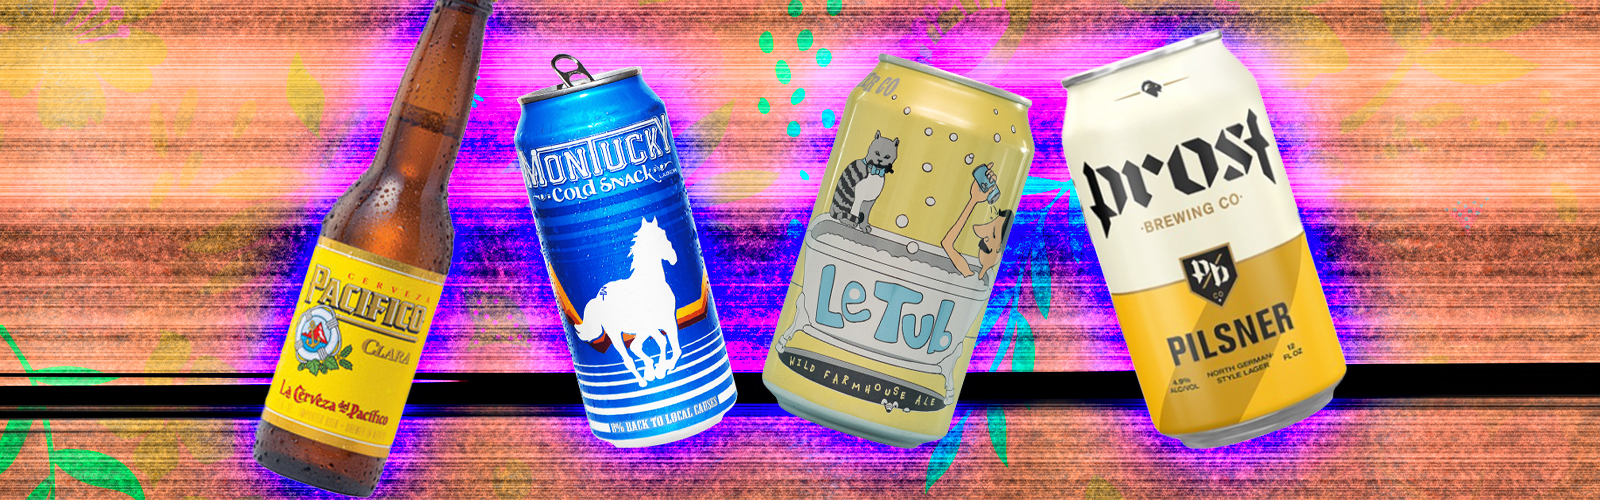 Pacifico/Montucky Cold Snacks/Whiner/Prost/istock/Uproxx